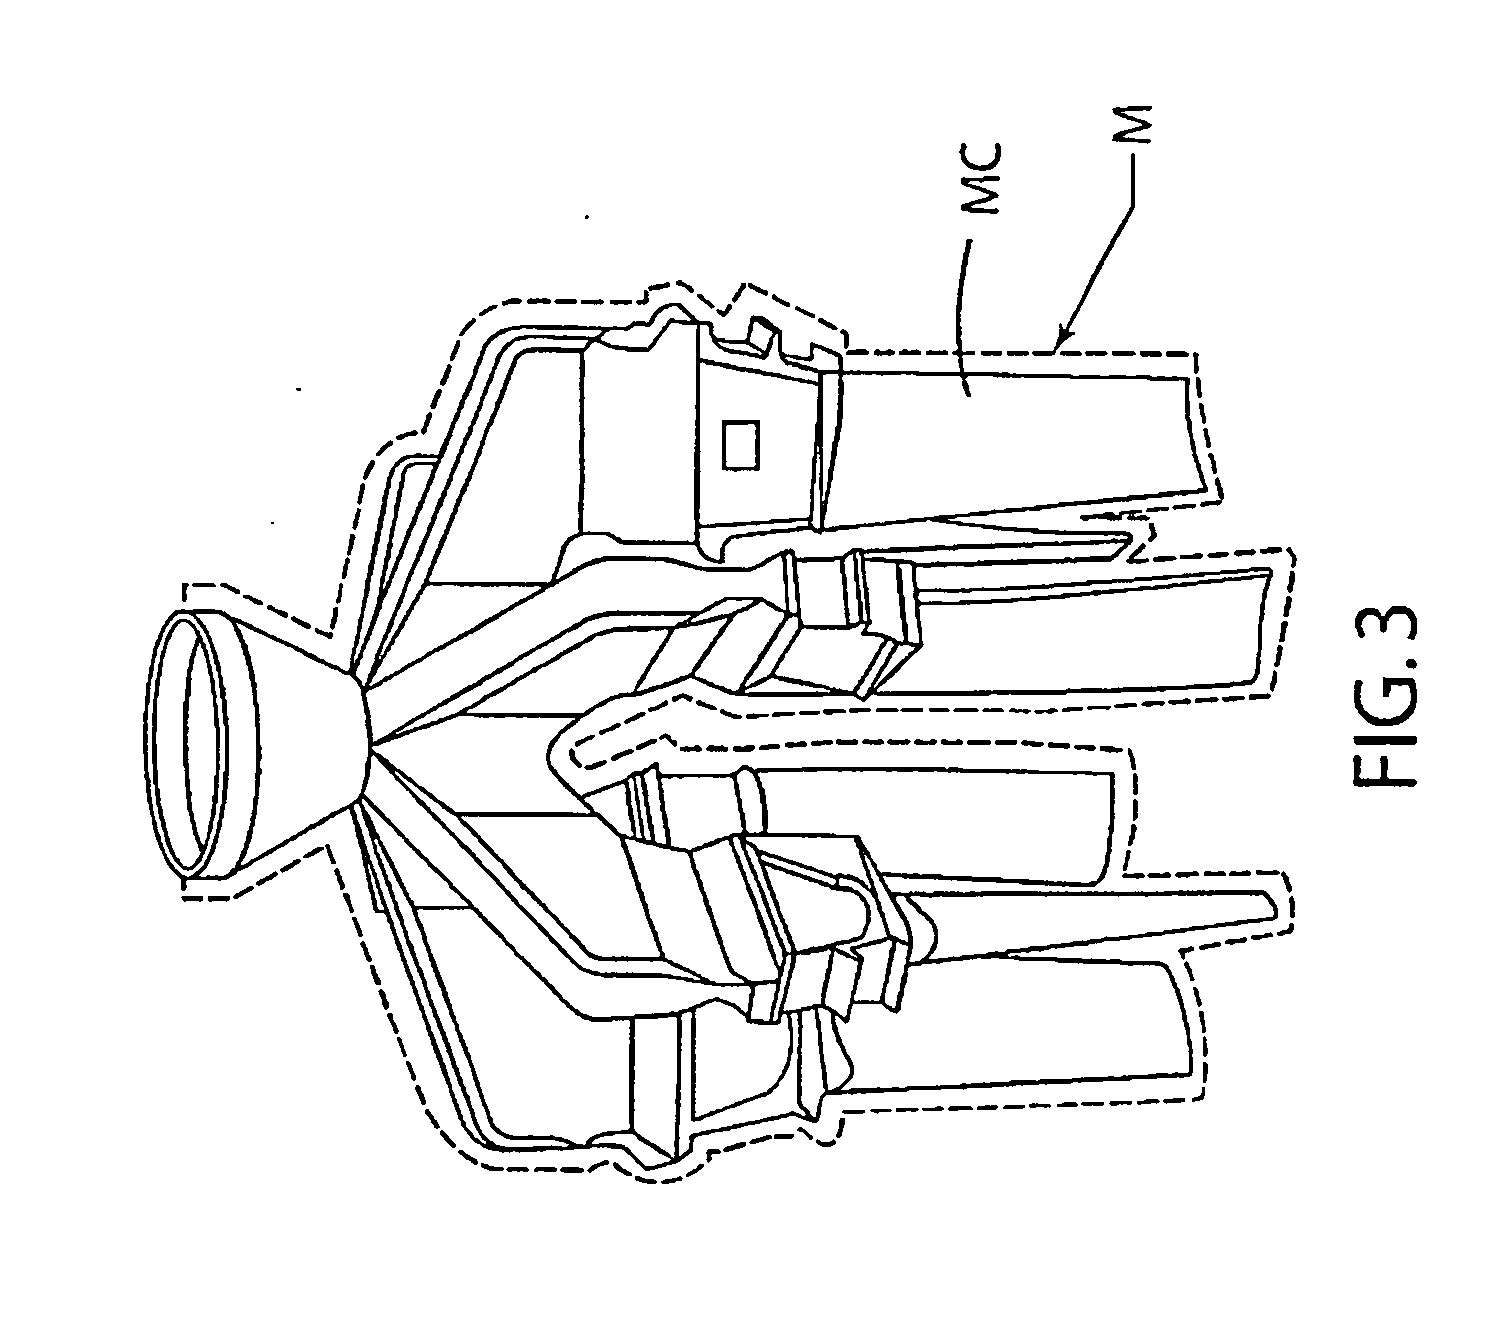 Casting method, apparatus, and product